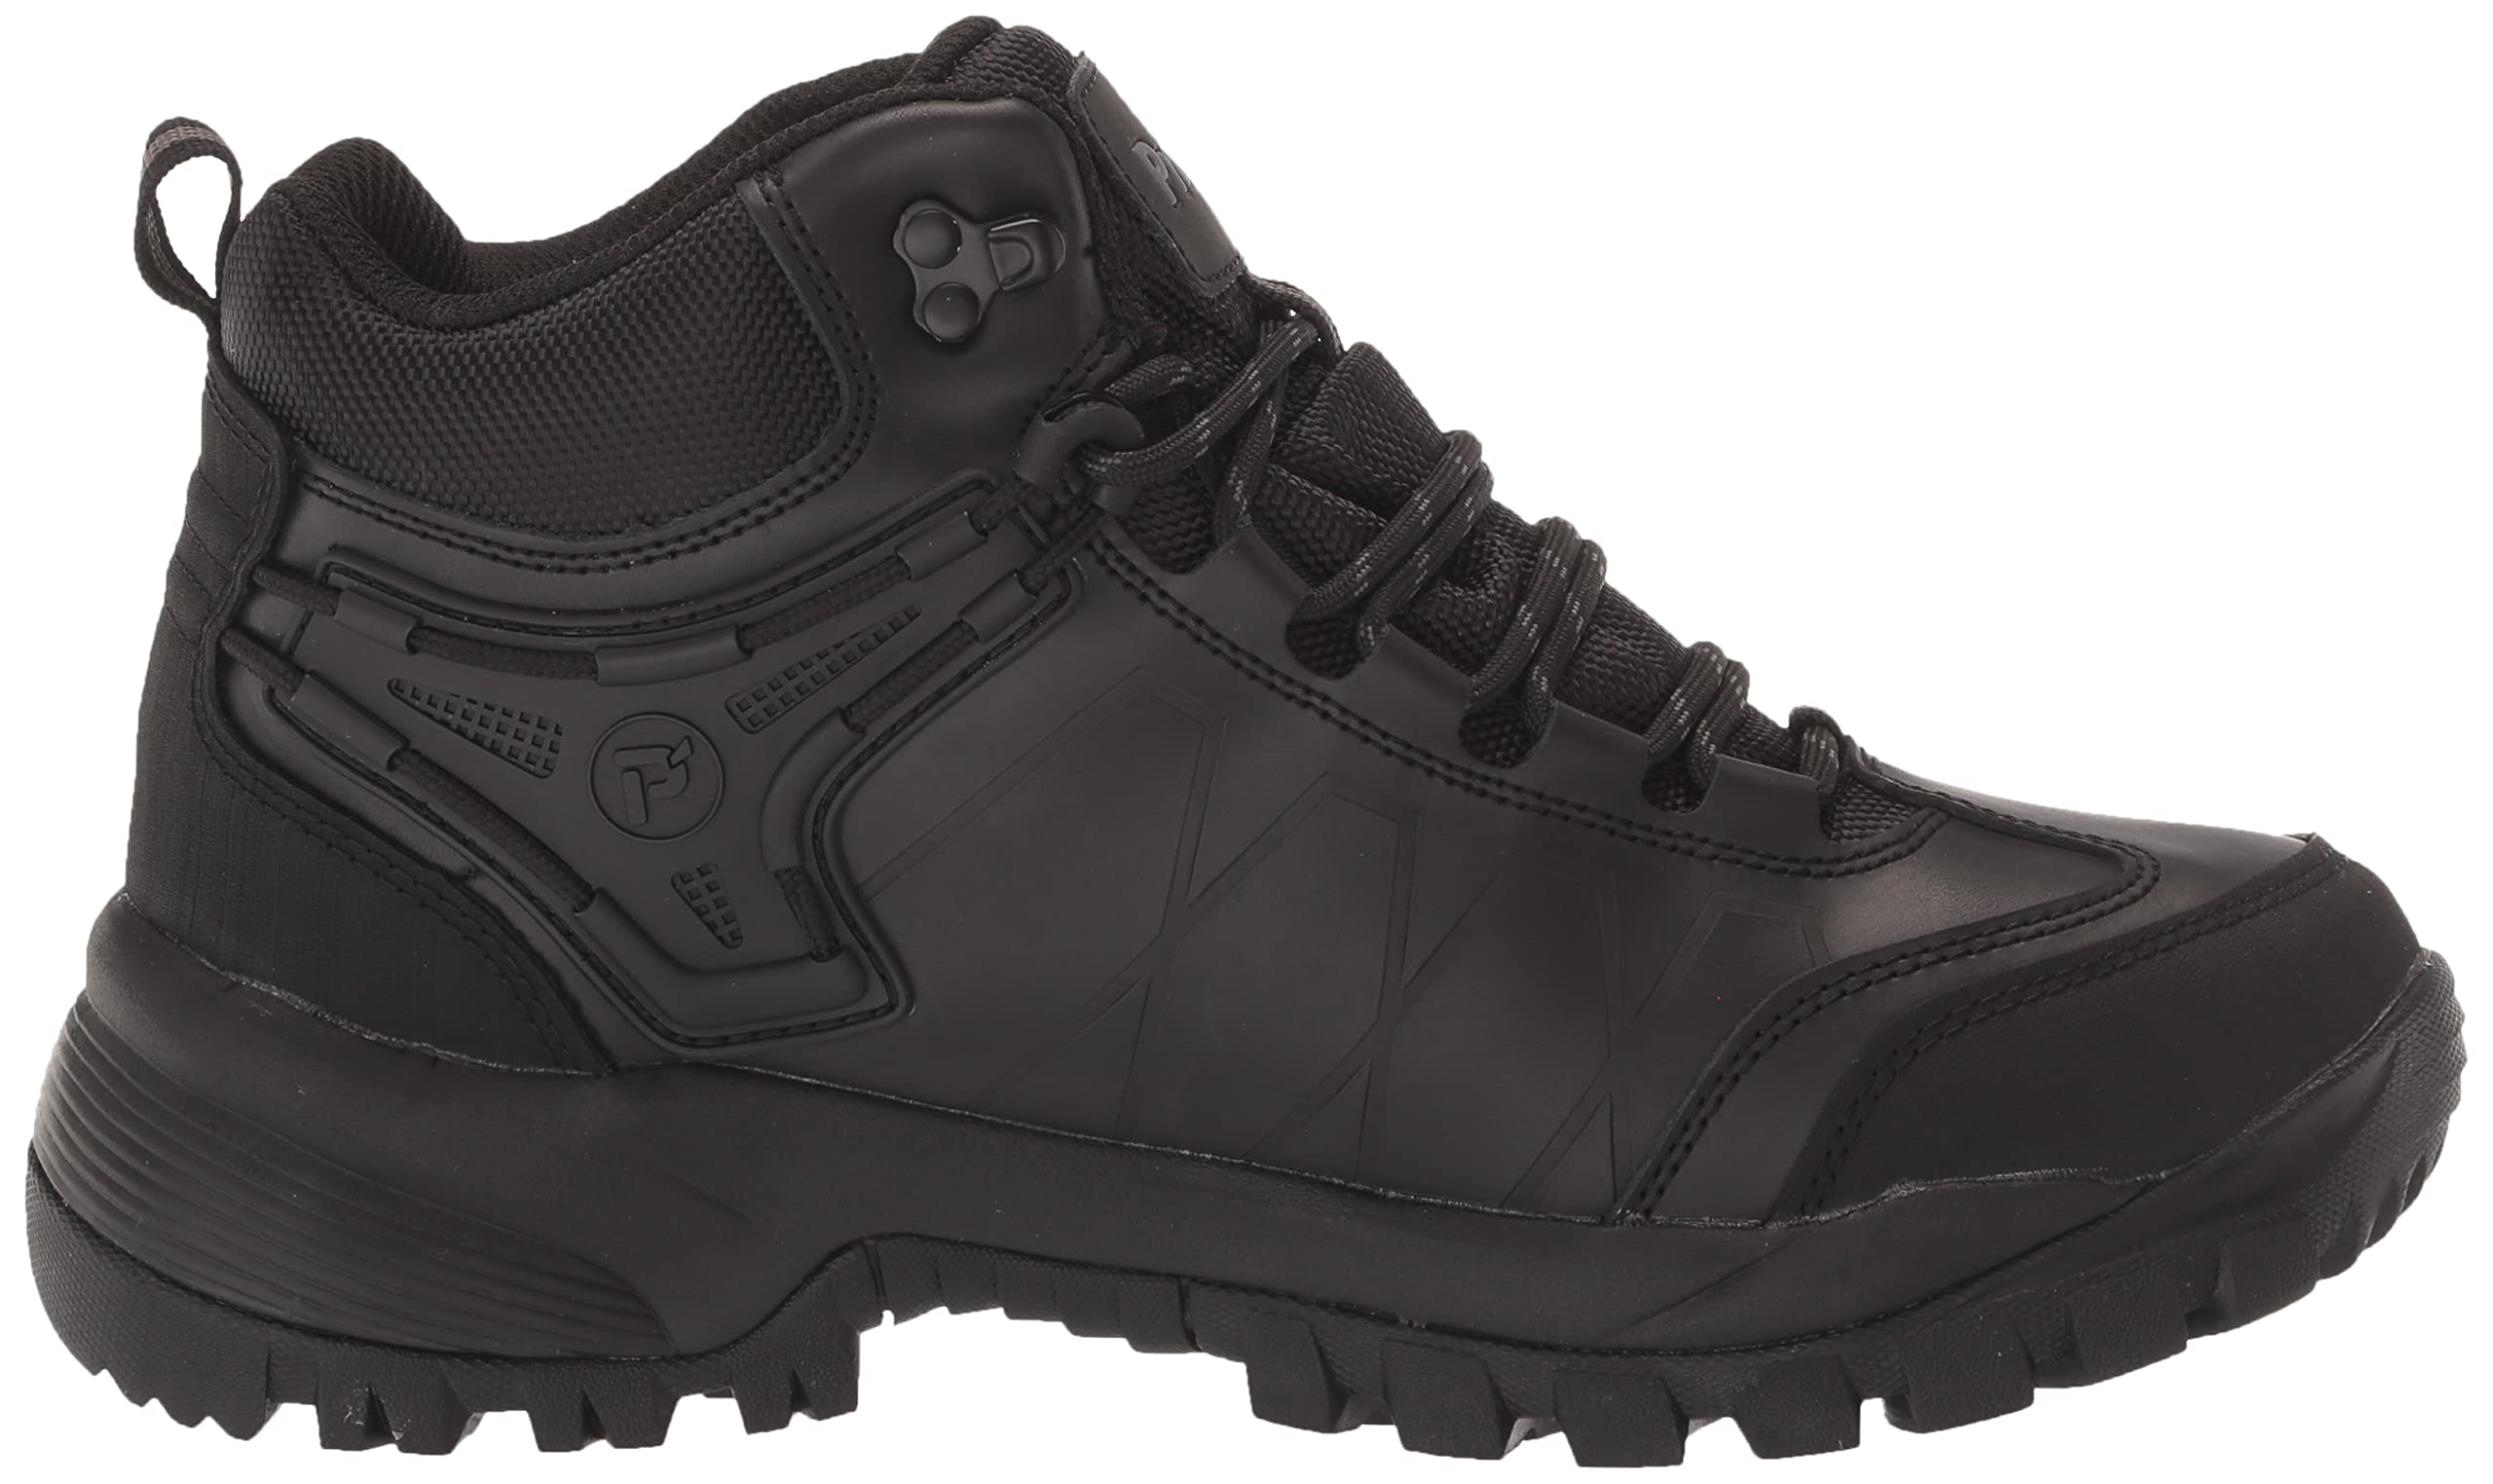 Propet Mens Ridge Walker Force Round Toe Hiking Hiking Casual Boots Ankle - Black